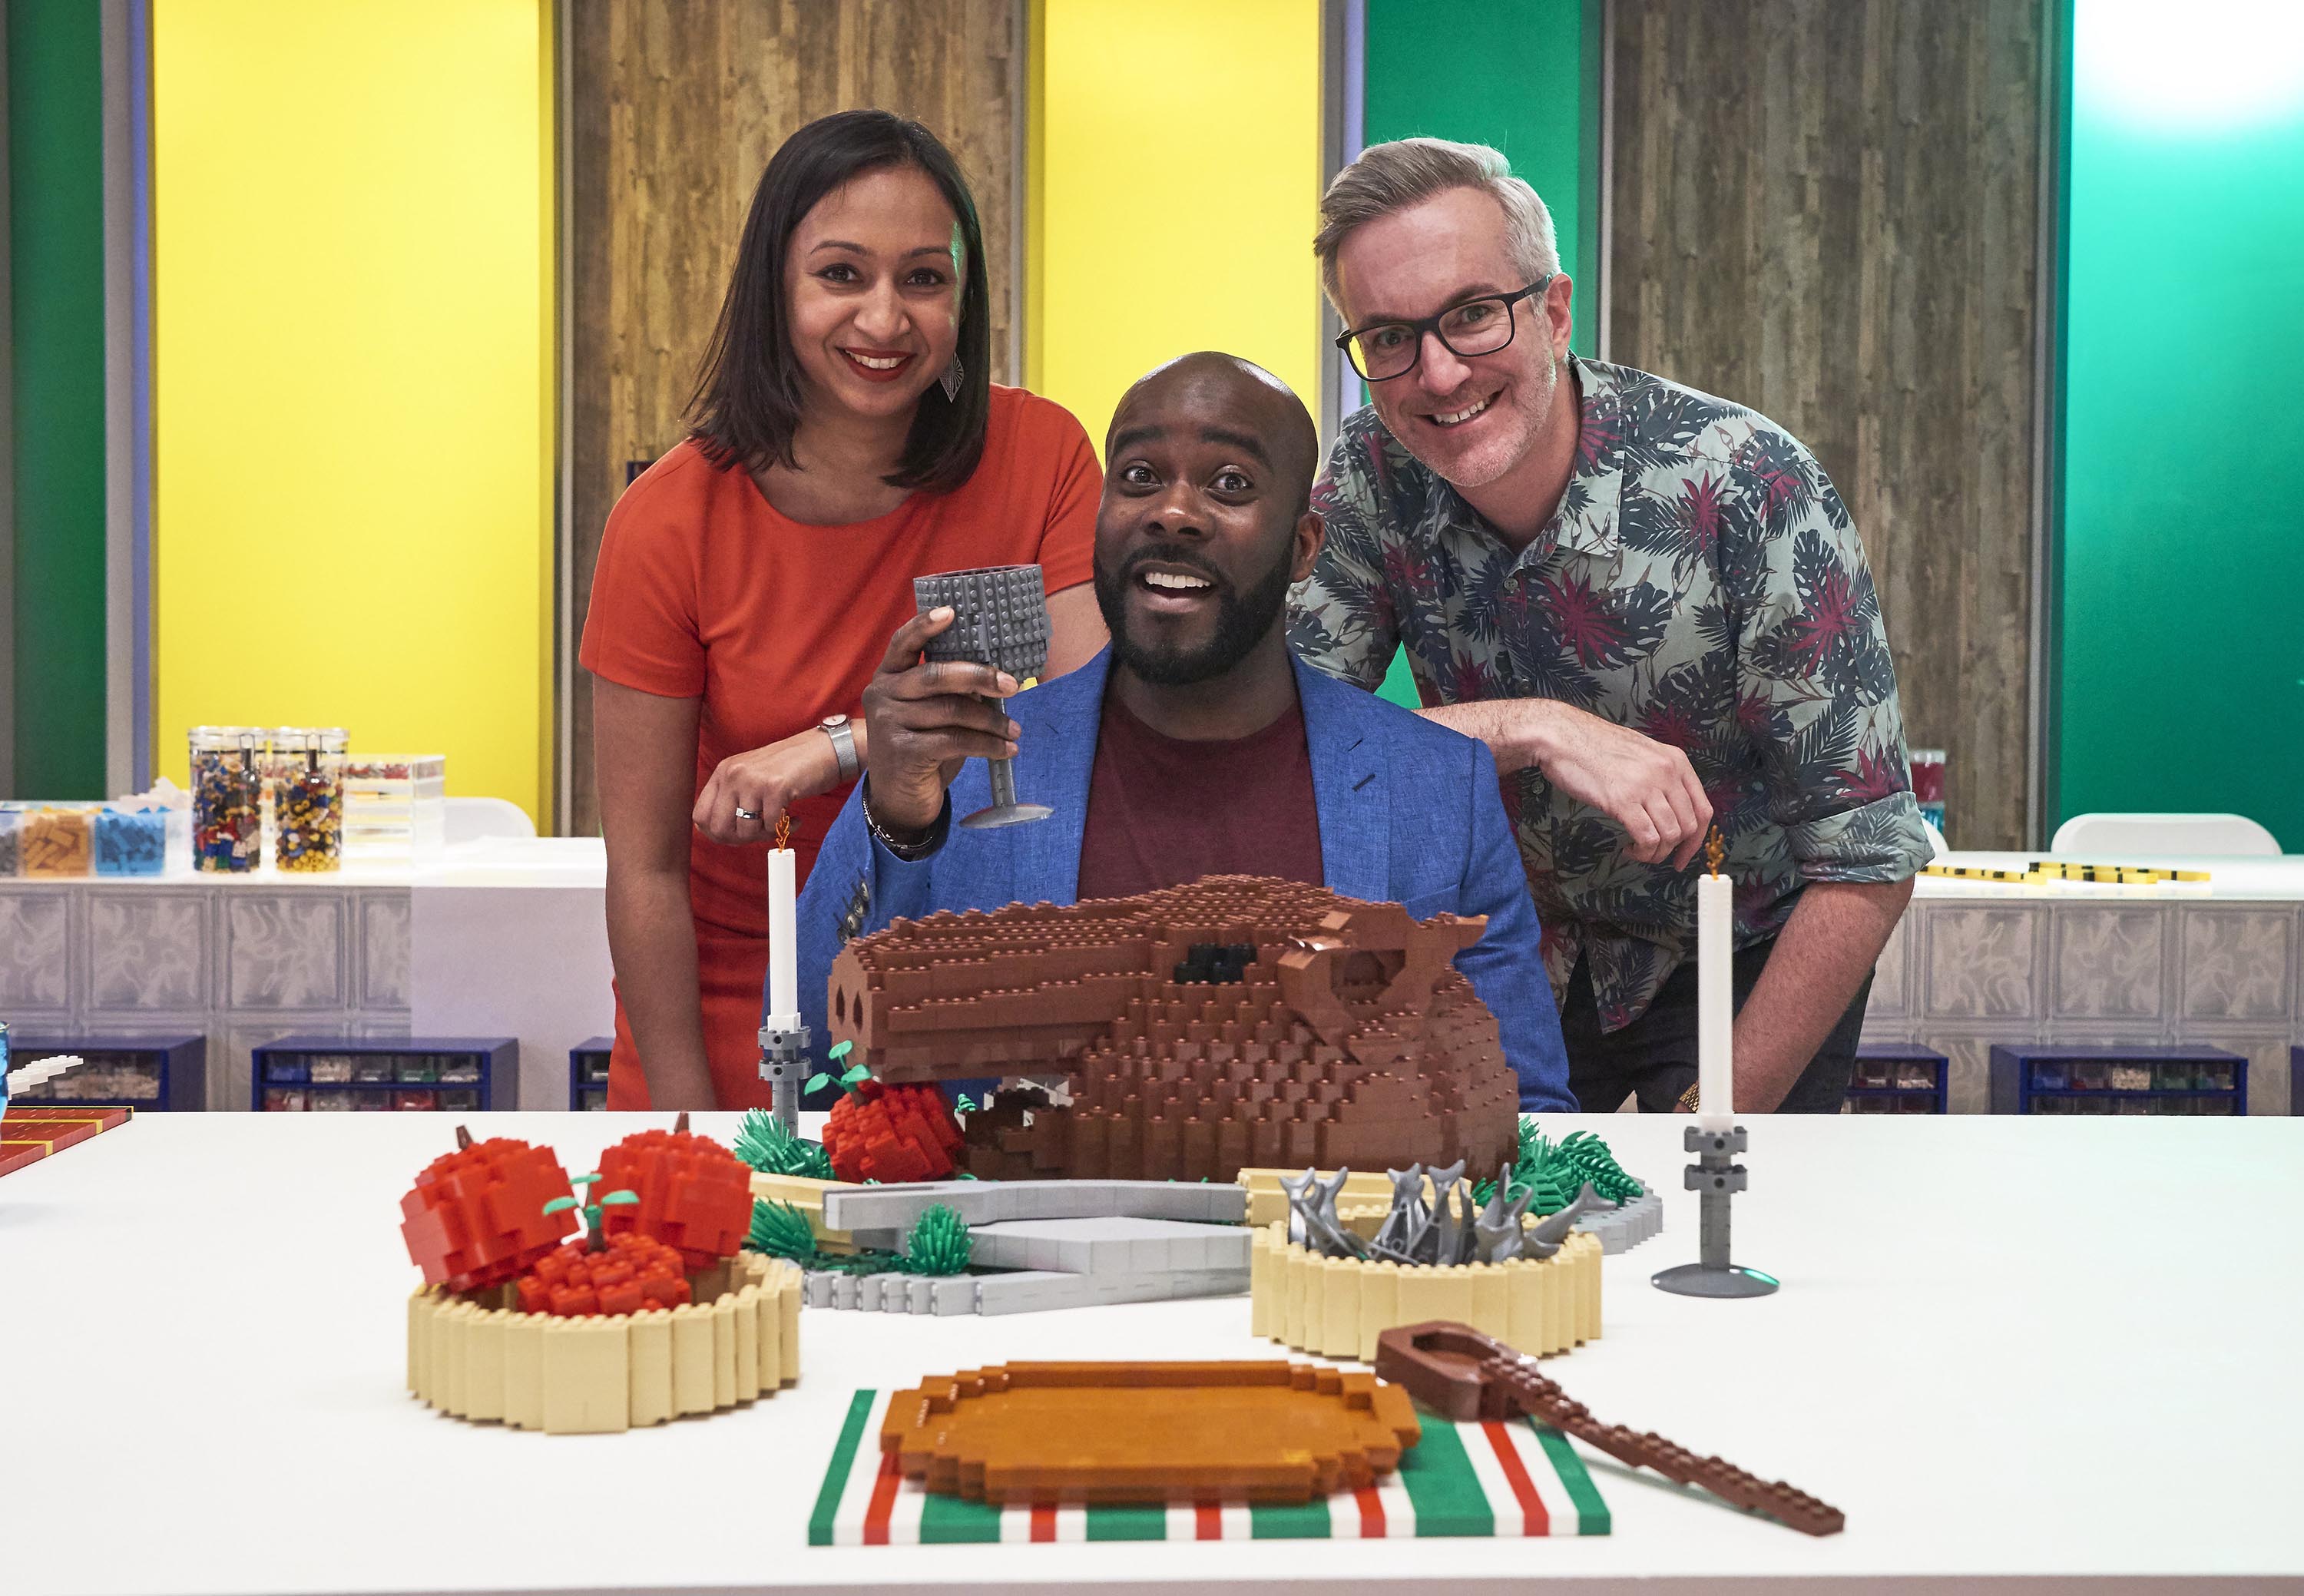 Melvin Odoom (centre) joins Lego Masters with Roma Agrawal and Matthew Aston.